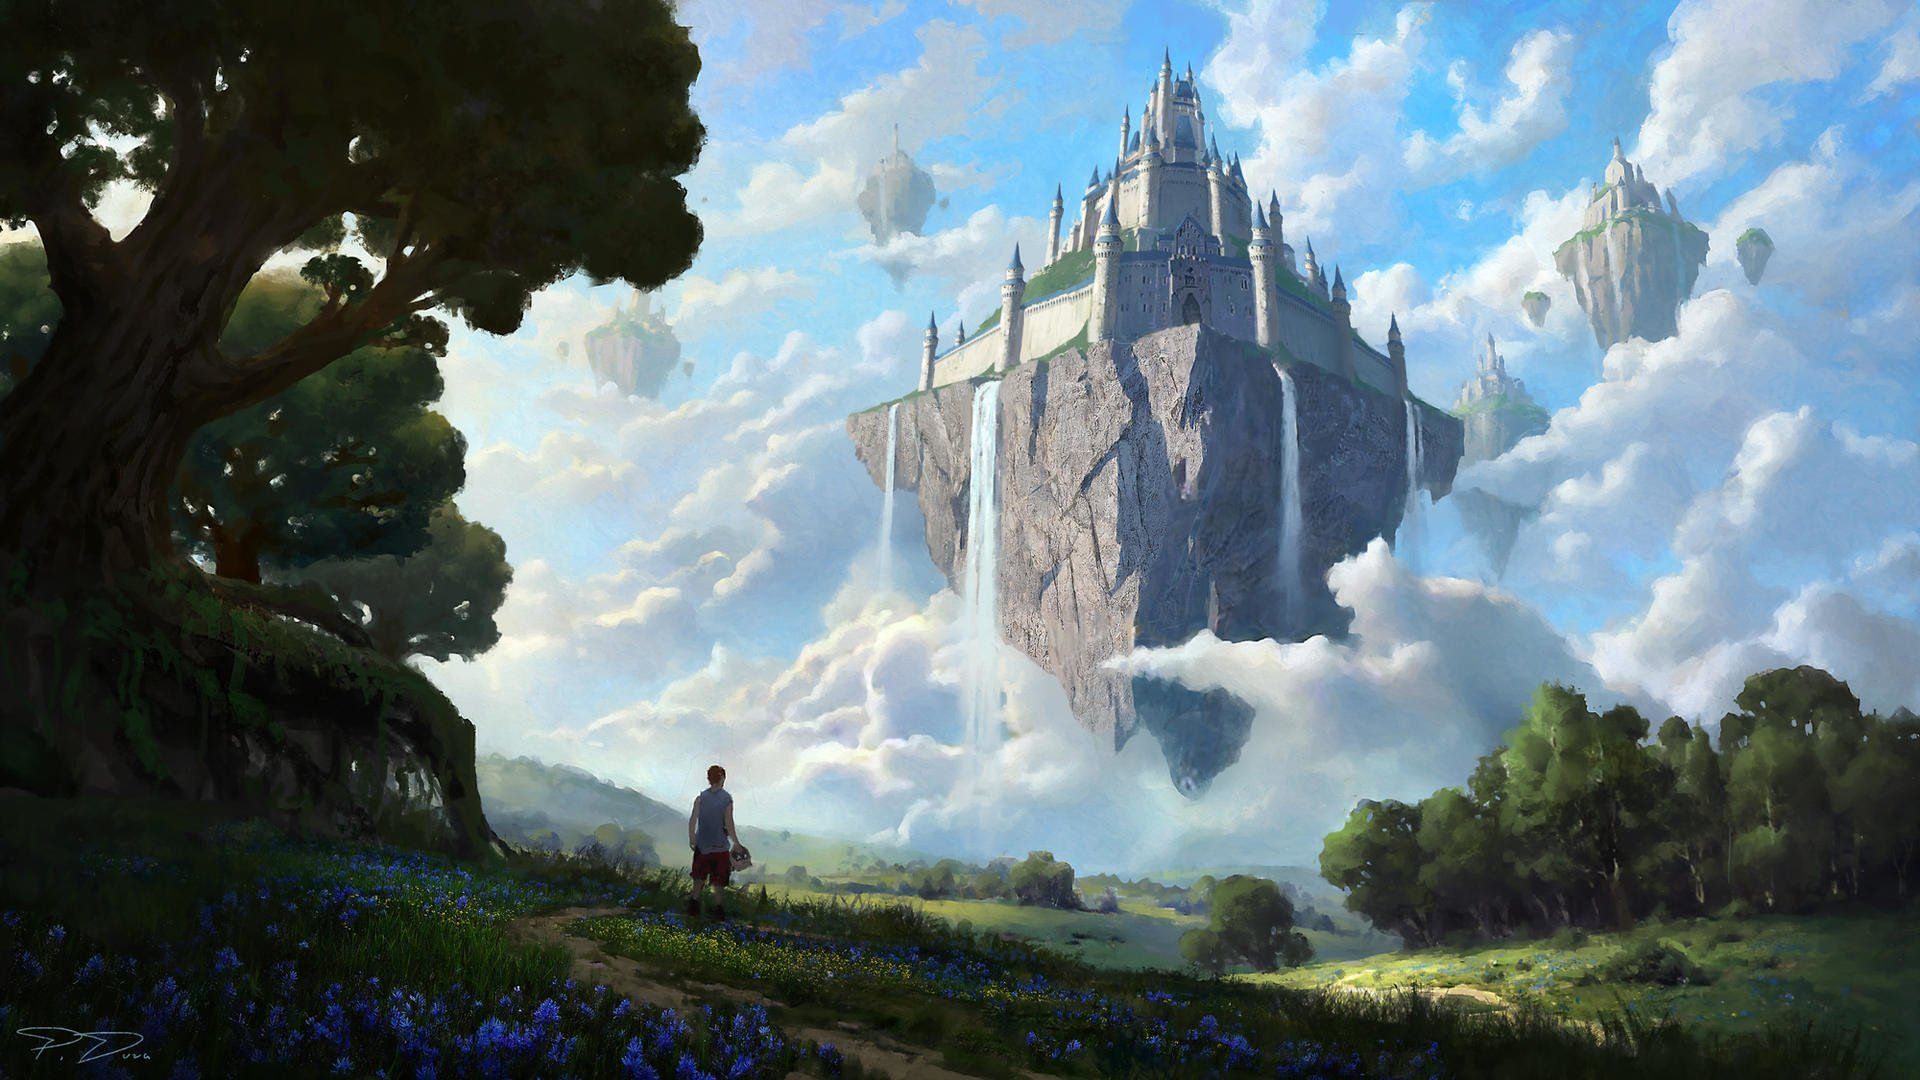 floating castle in the sky